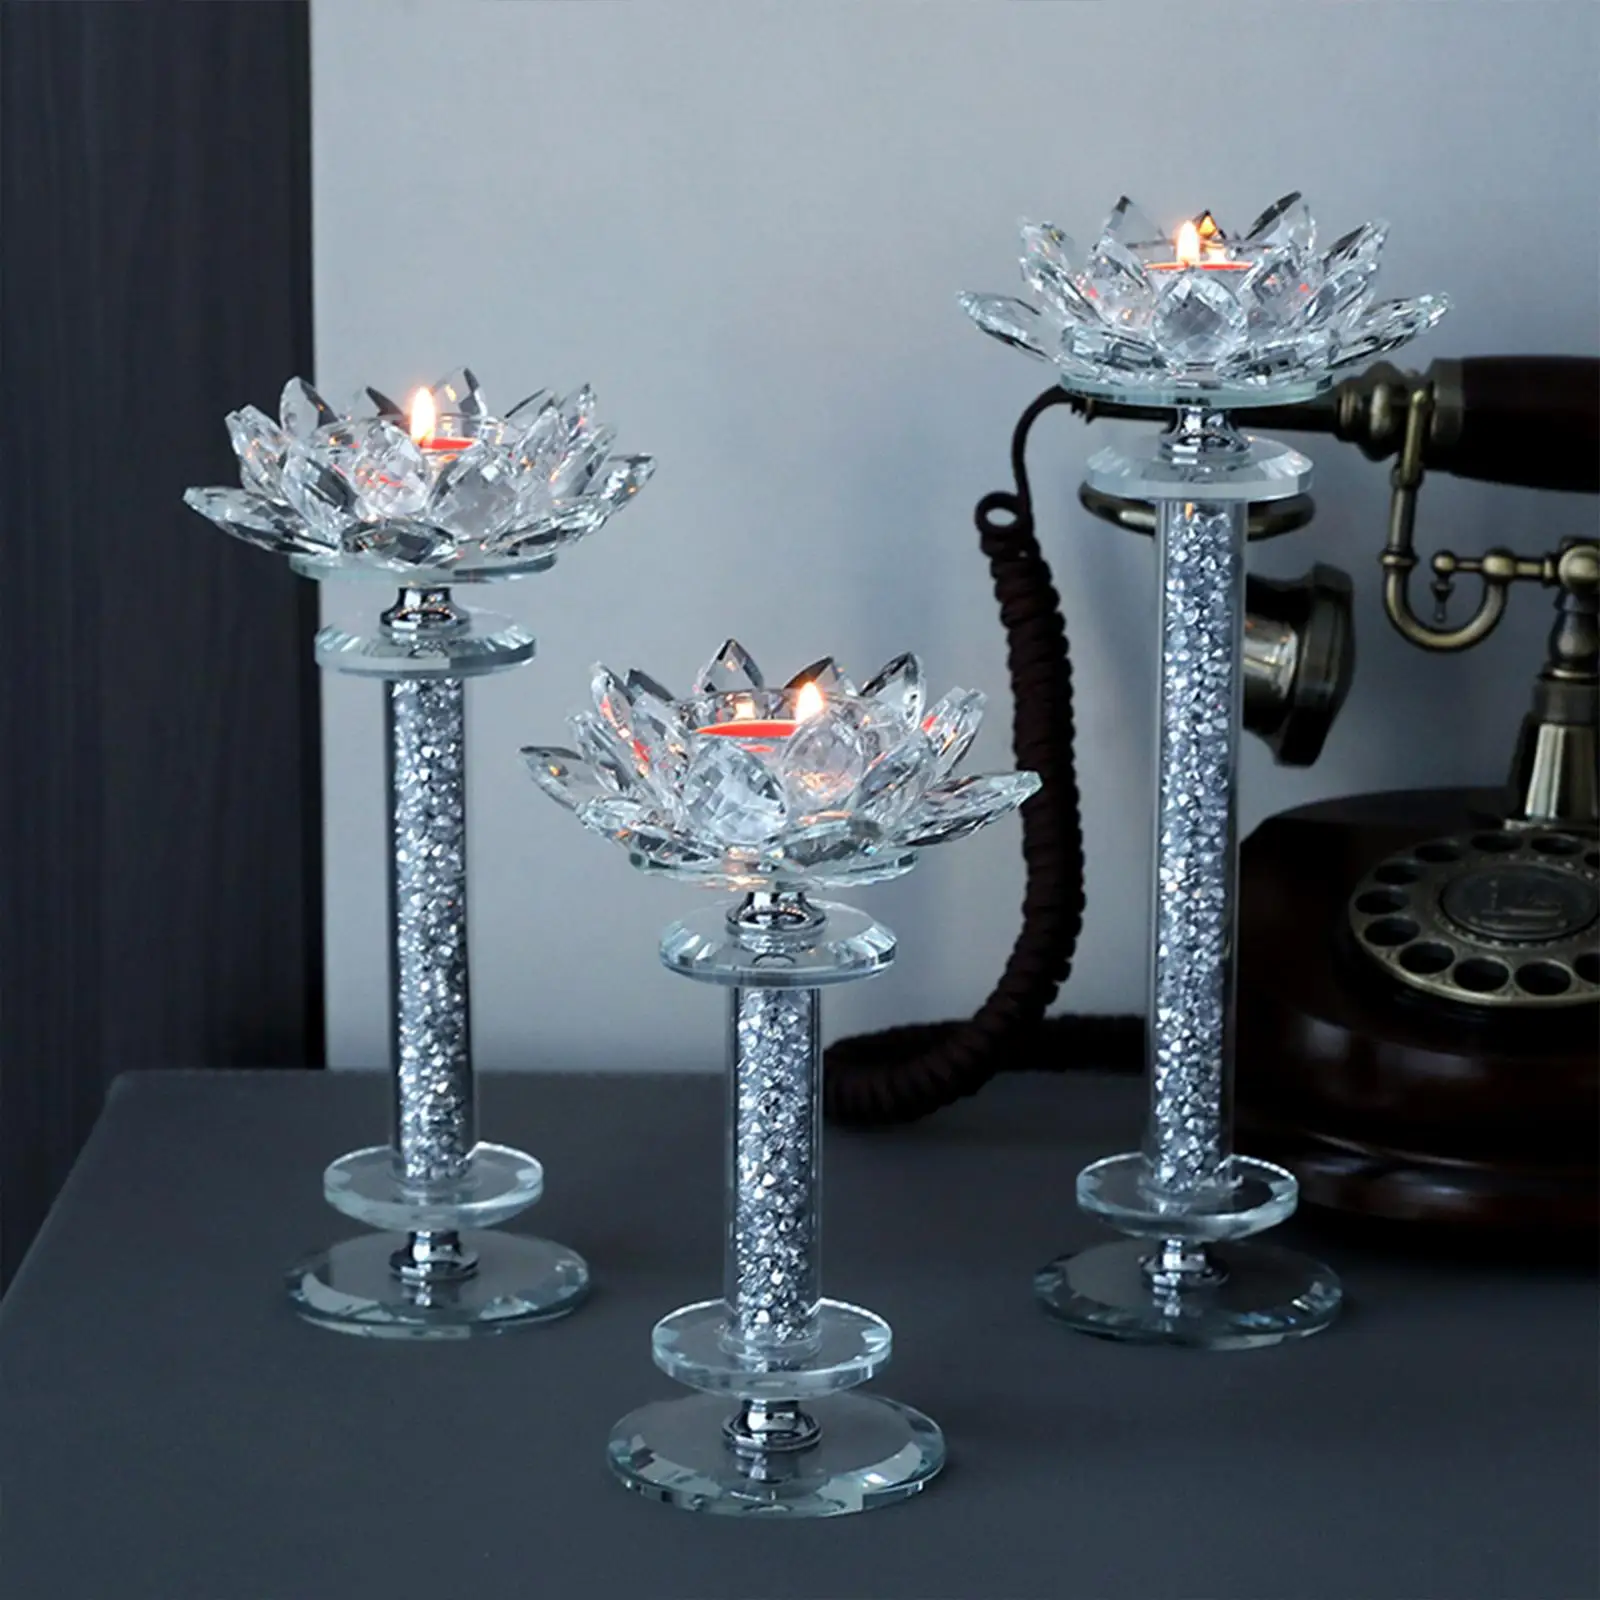 3x Glass Lotus Flower Candle Holder Elegant Candle Stand for Table Centerpiece Bedroom Wedding Party Festivals Home Decoration